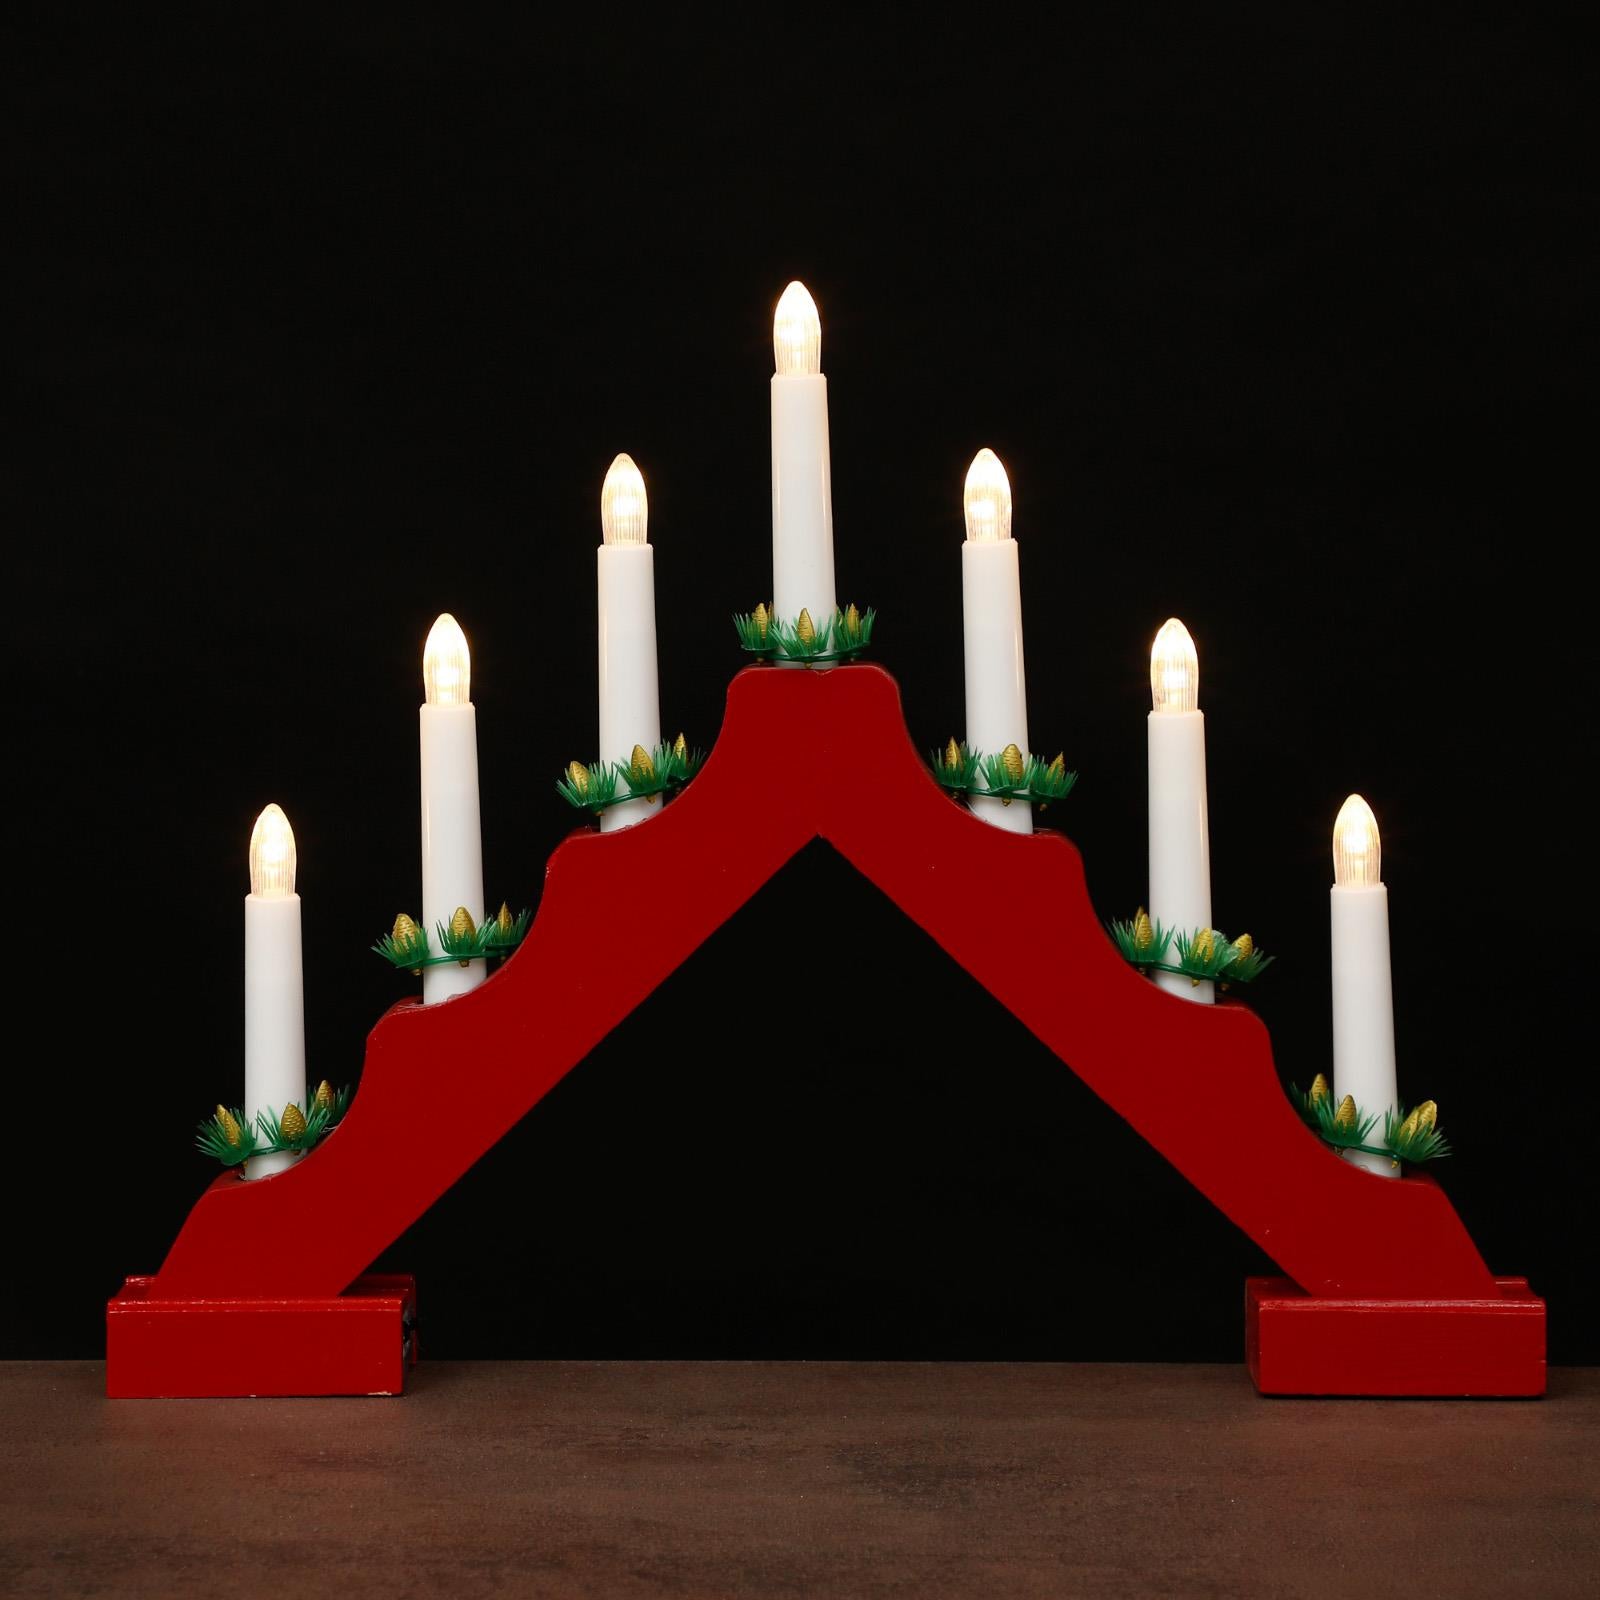 Red Wooden Candle Bridge With 7 Led Lights by GEEZY - The Magic Toy Shop